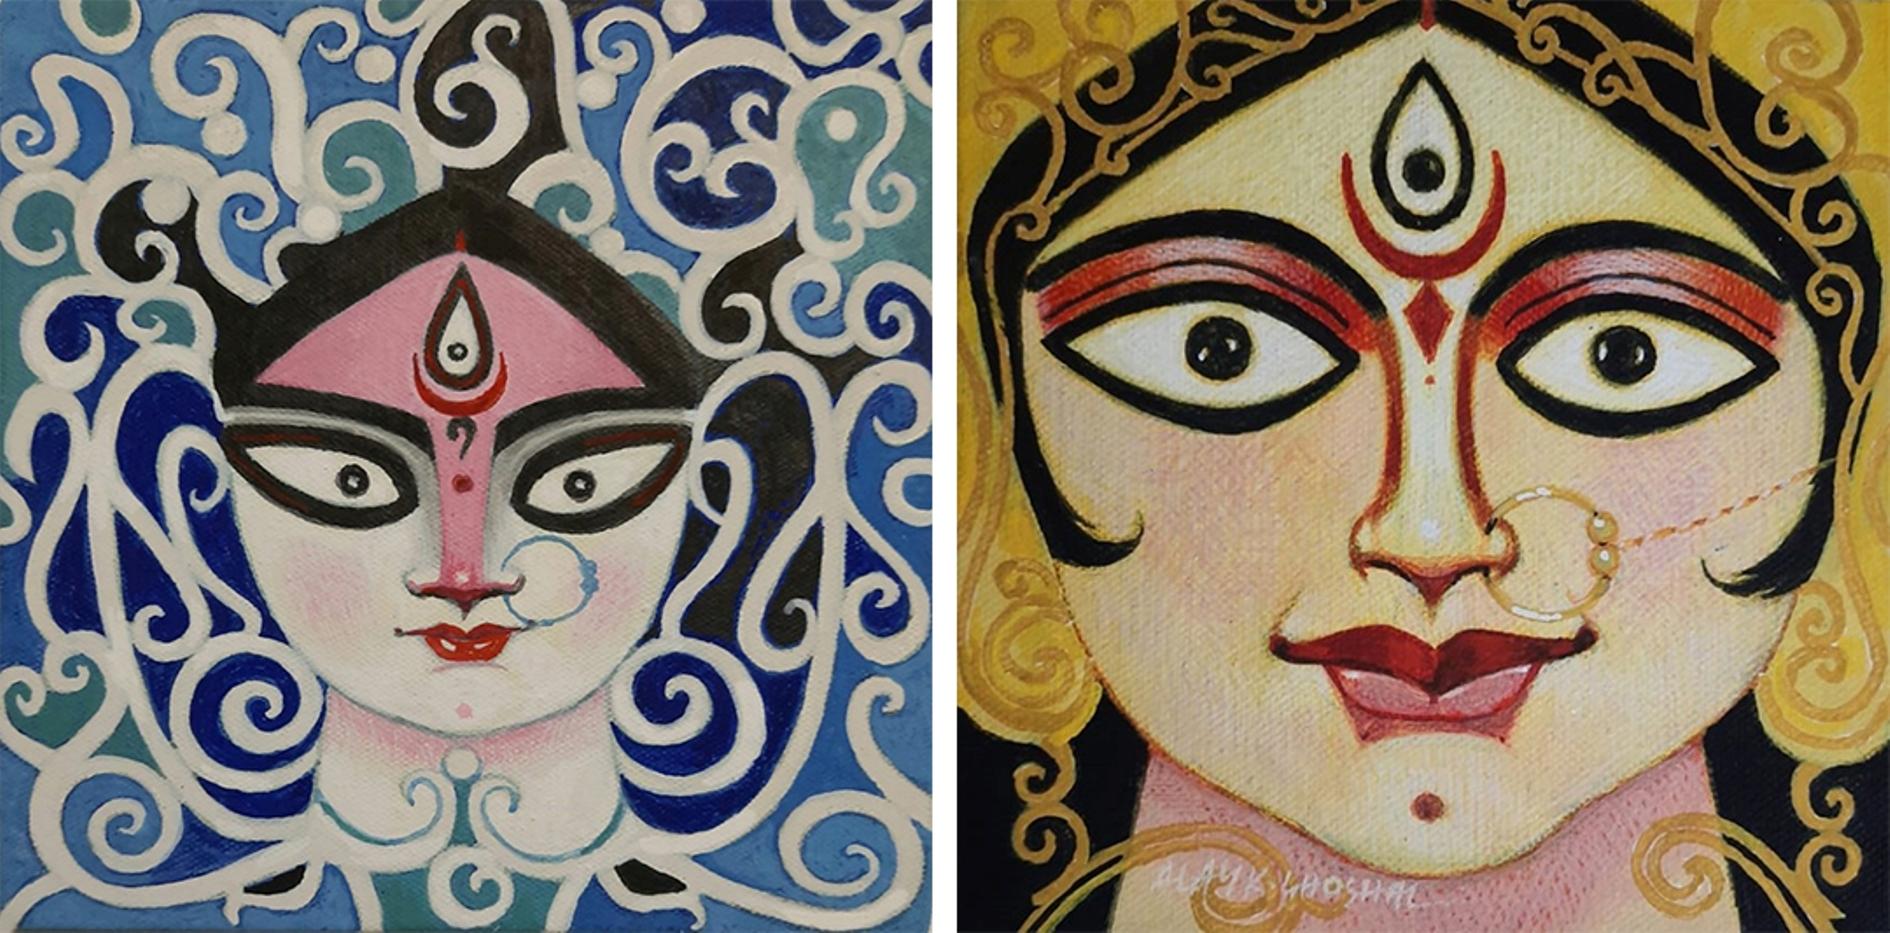 Alay Ghoshal Figurative Painting - Durga, Goddess, Face, Festival, Tempera on Board by Indian Artist "In Stock"